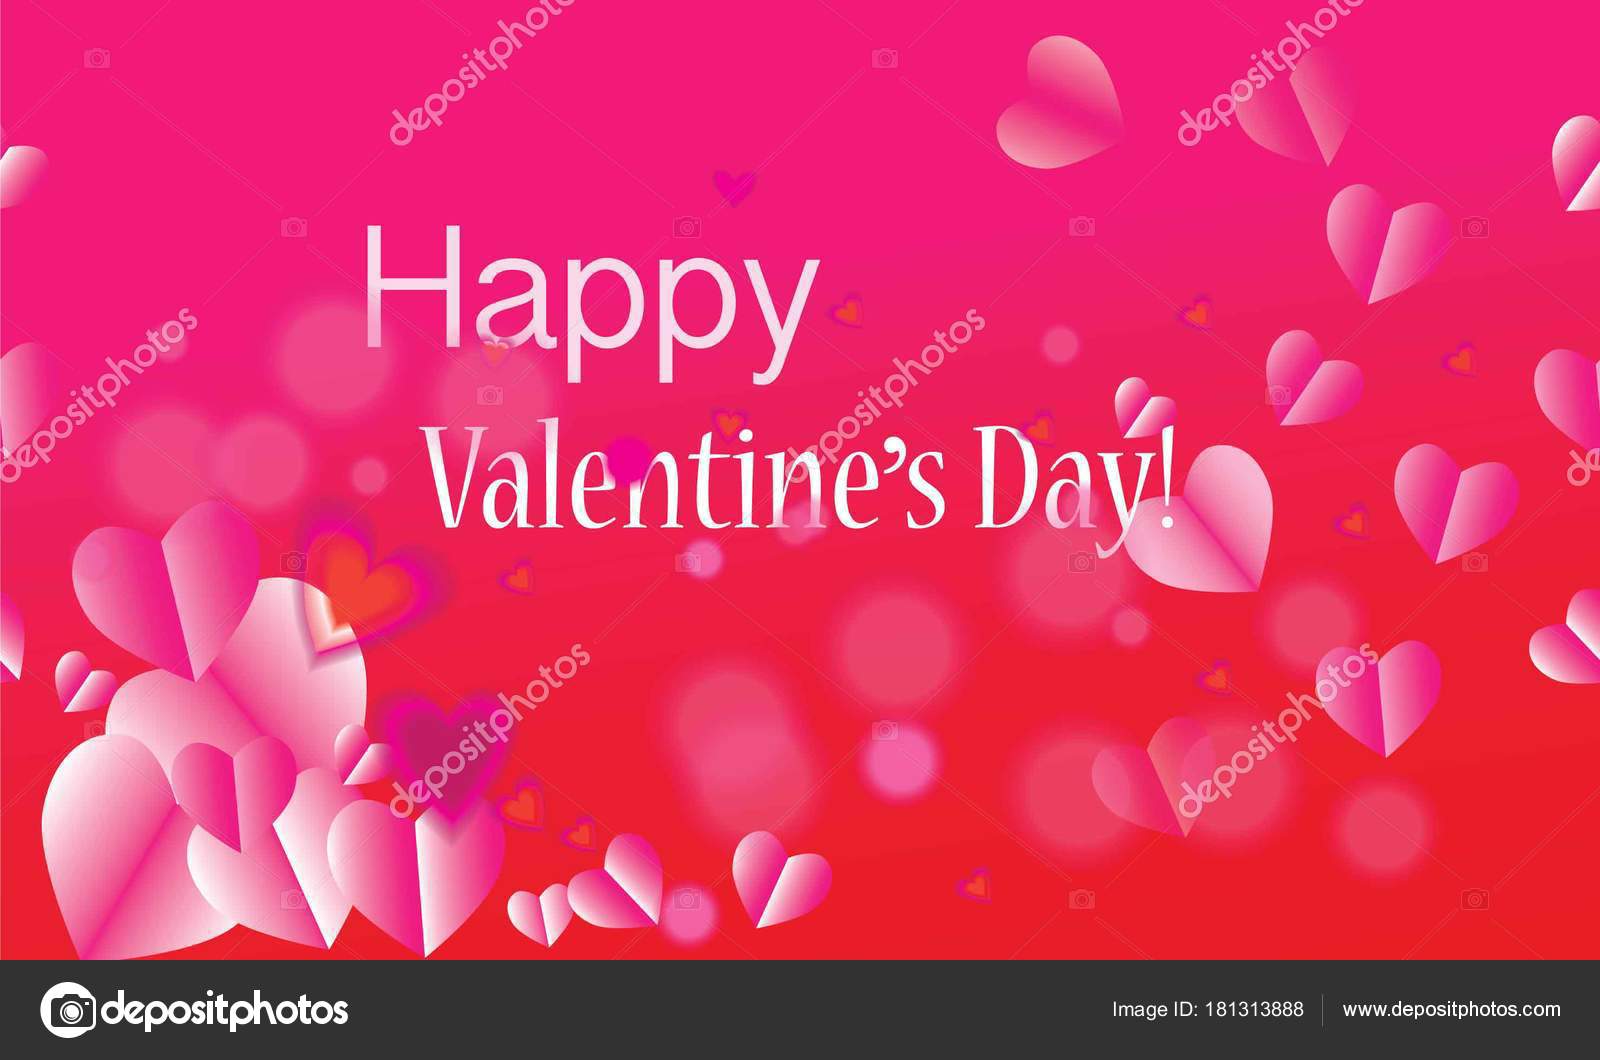 Valentines Day Mother S Day Women S Day Holiday Birthday